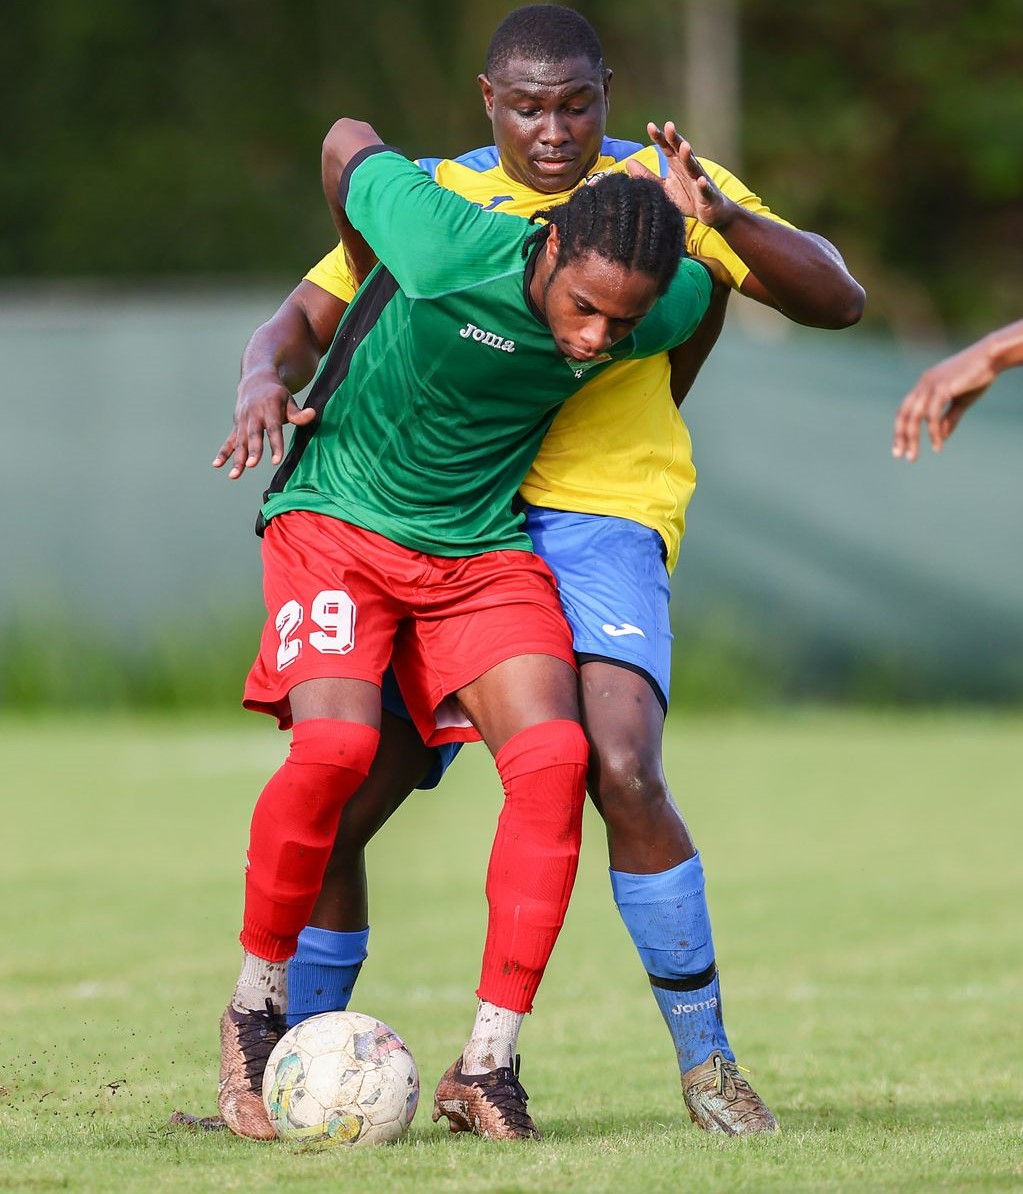 San Juan Jabloteh's Elijah Seechan (green shirt) screens off the Defence Force II FC defender Trevin Latapy to maintain possession during the T&T Premier Football League Knockout Cup preliminary match between at the Phase II Recreation Grounds in La Horquetta on Wednesday. San Juan Jabloteh won 2-1. (Photo by Daniel Prentice)